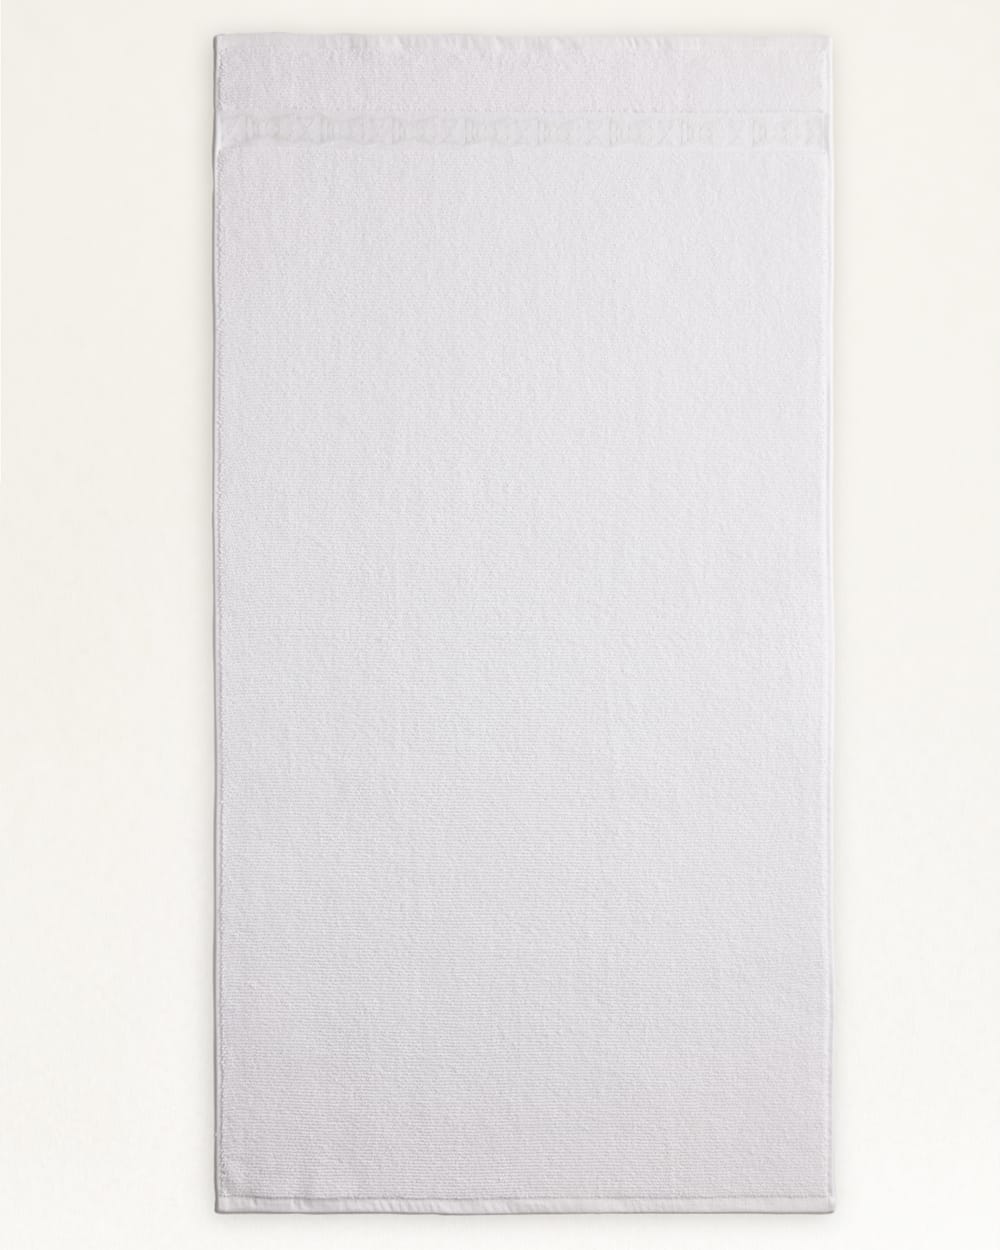 ALTERNATE VIEW OF LOS LUNAS TONAL TOWEL COLLECTION IN BRIGHT WHITE image number 2